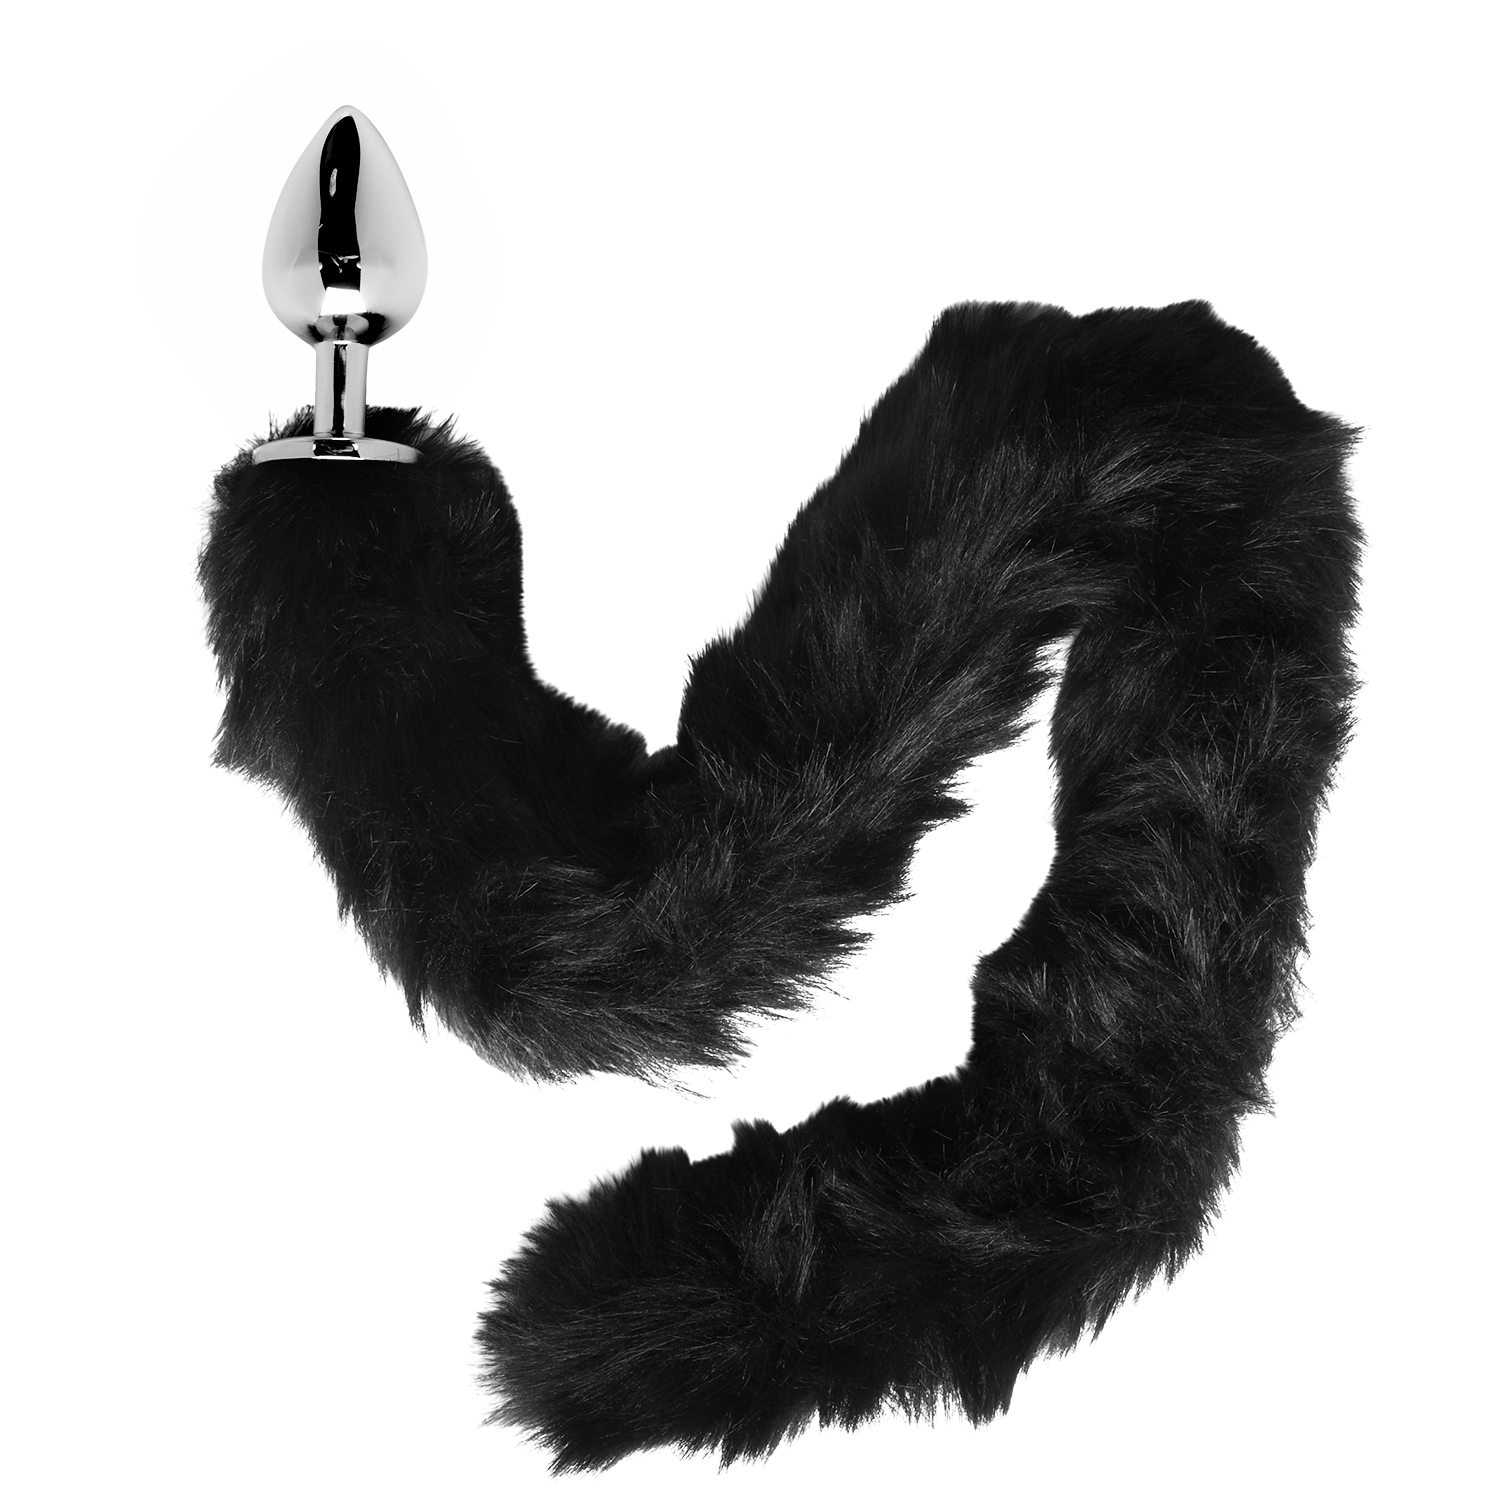 Furry Fantasy Black Panther Tail Butt Plug - Silver